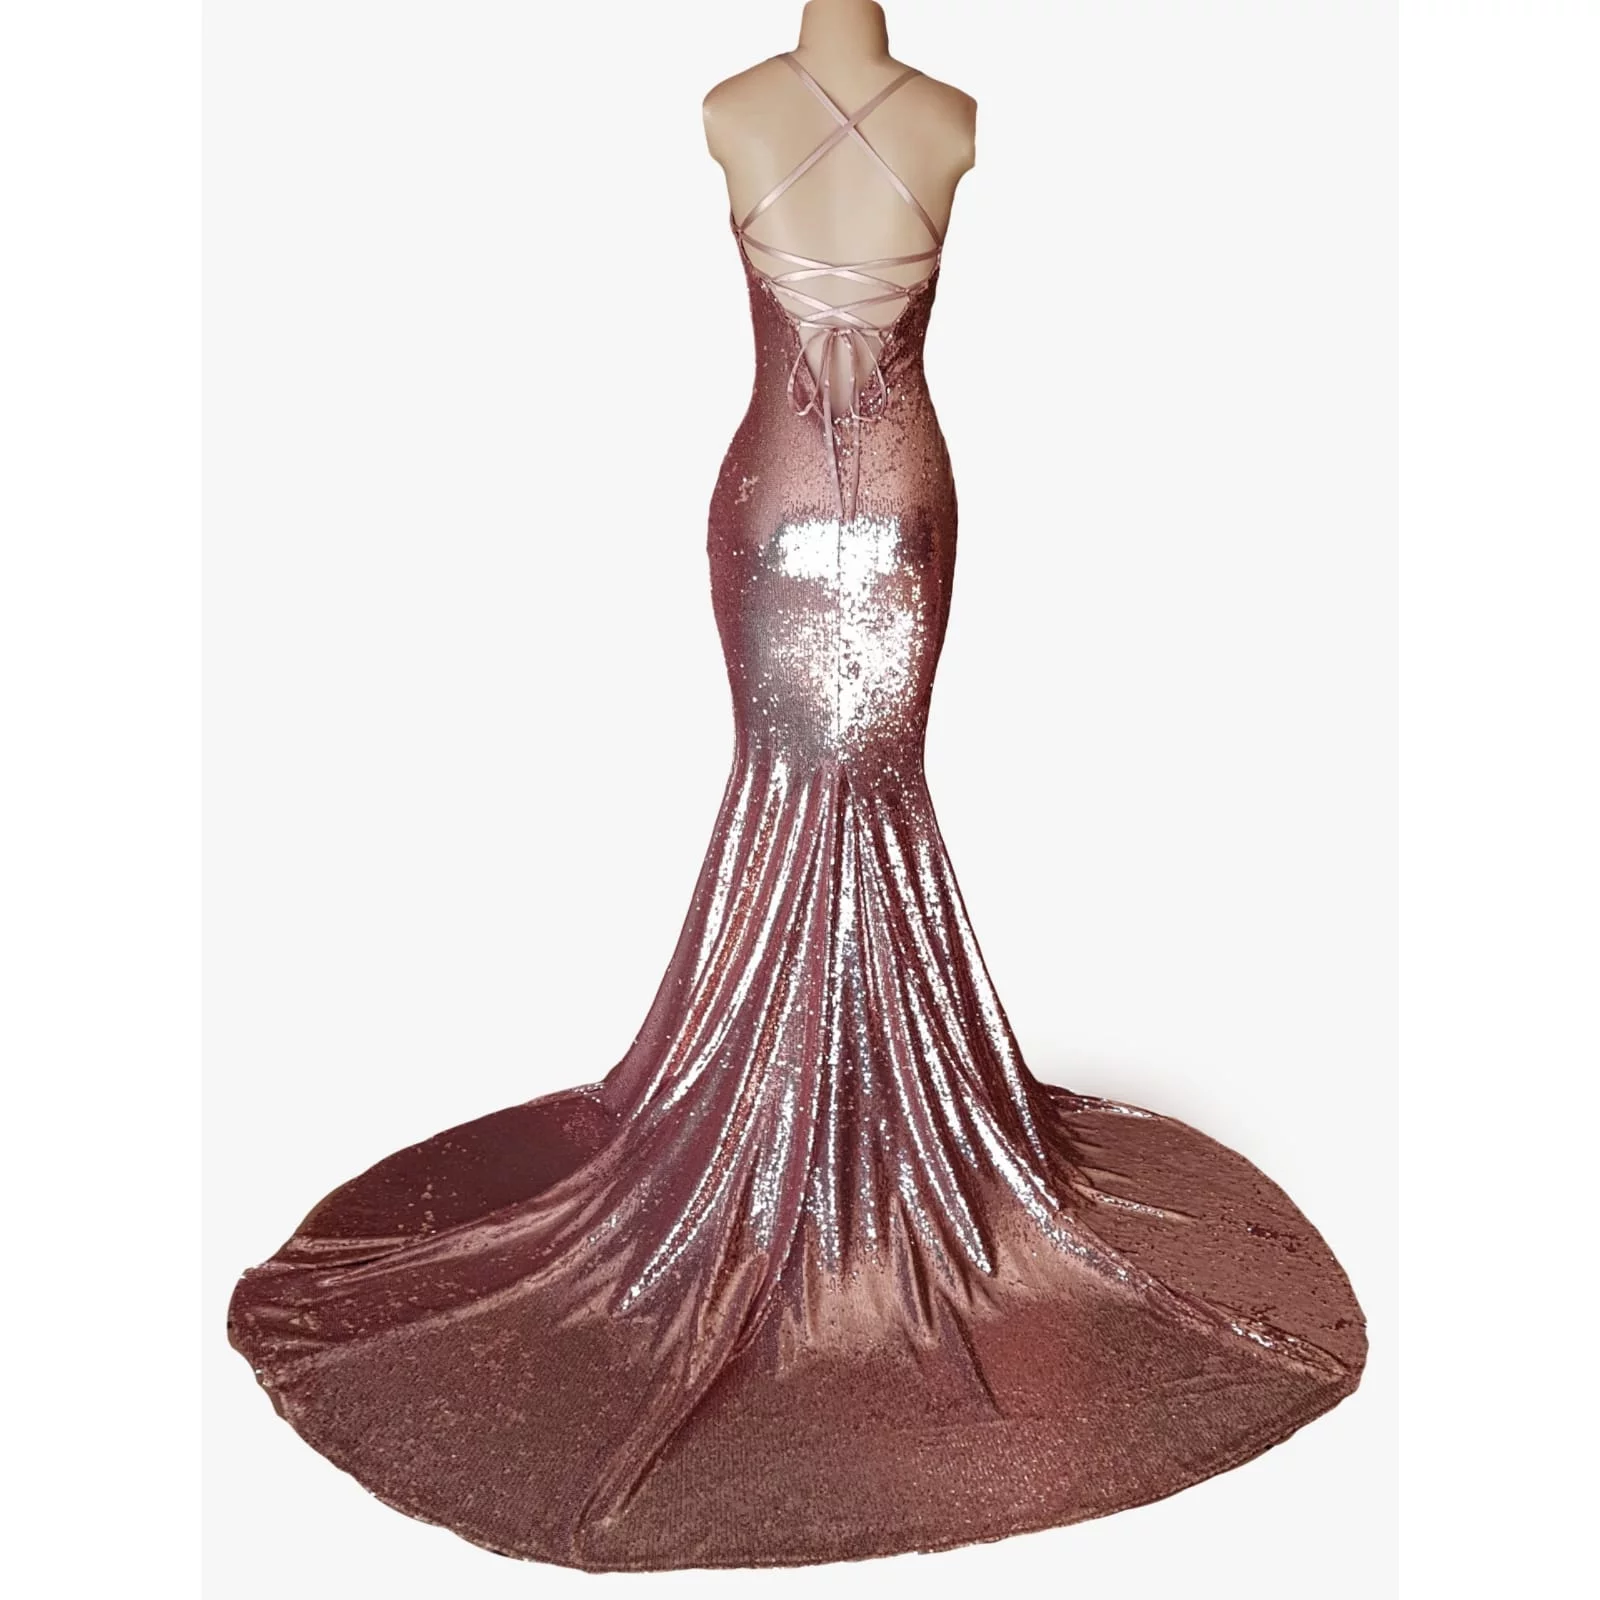 Rose gold fully sequined soft mermaid evening dress 2 rose gold fully sequined soft mermaid evening dress with a low open back, with lace-up detail.